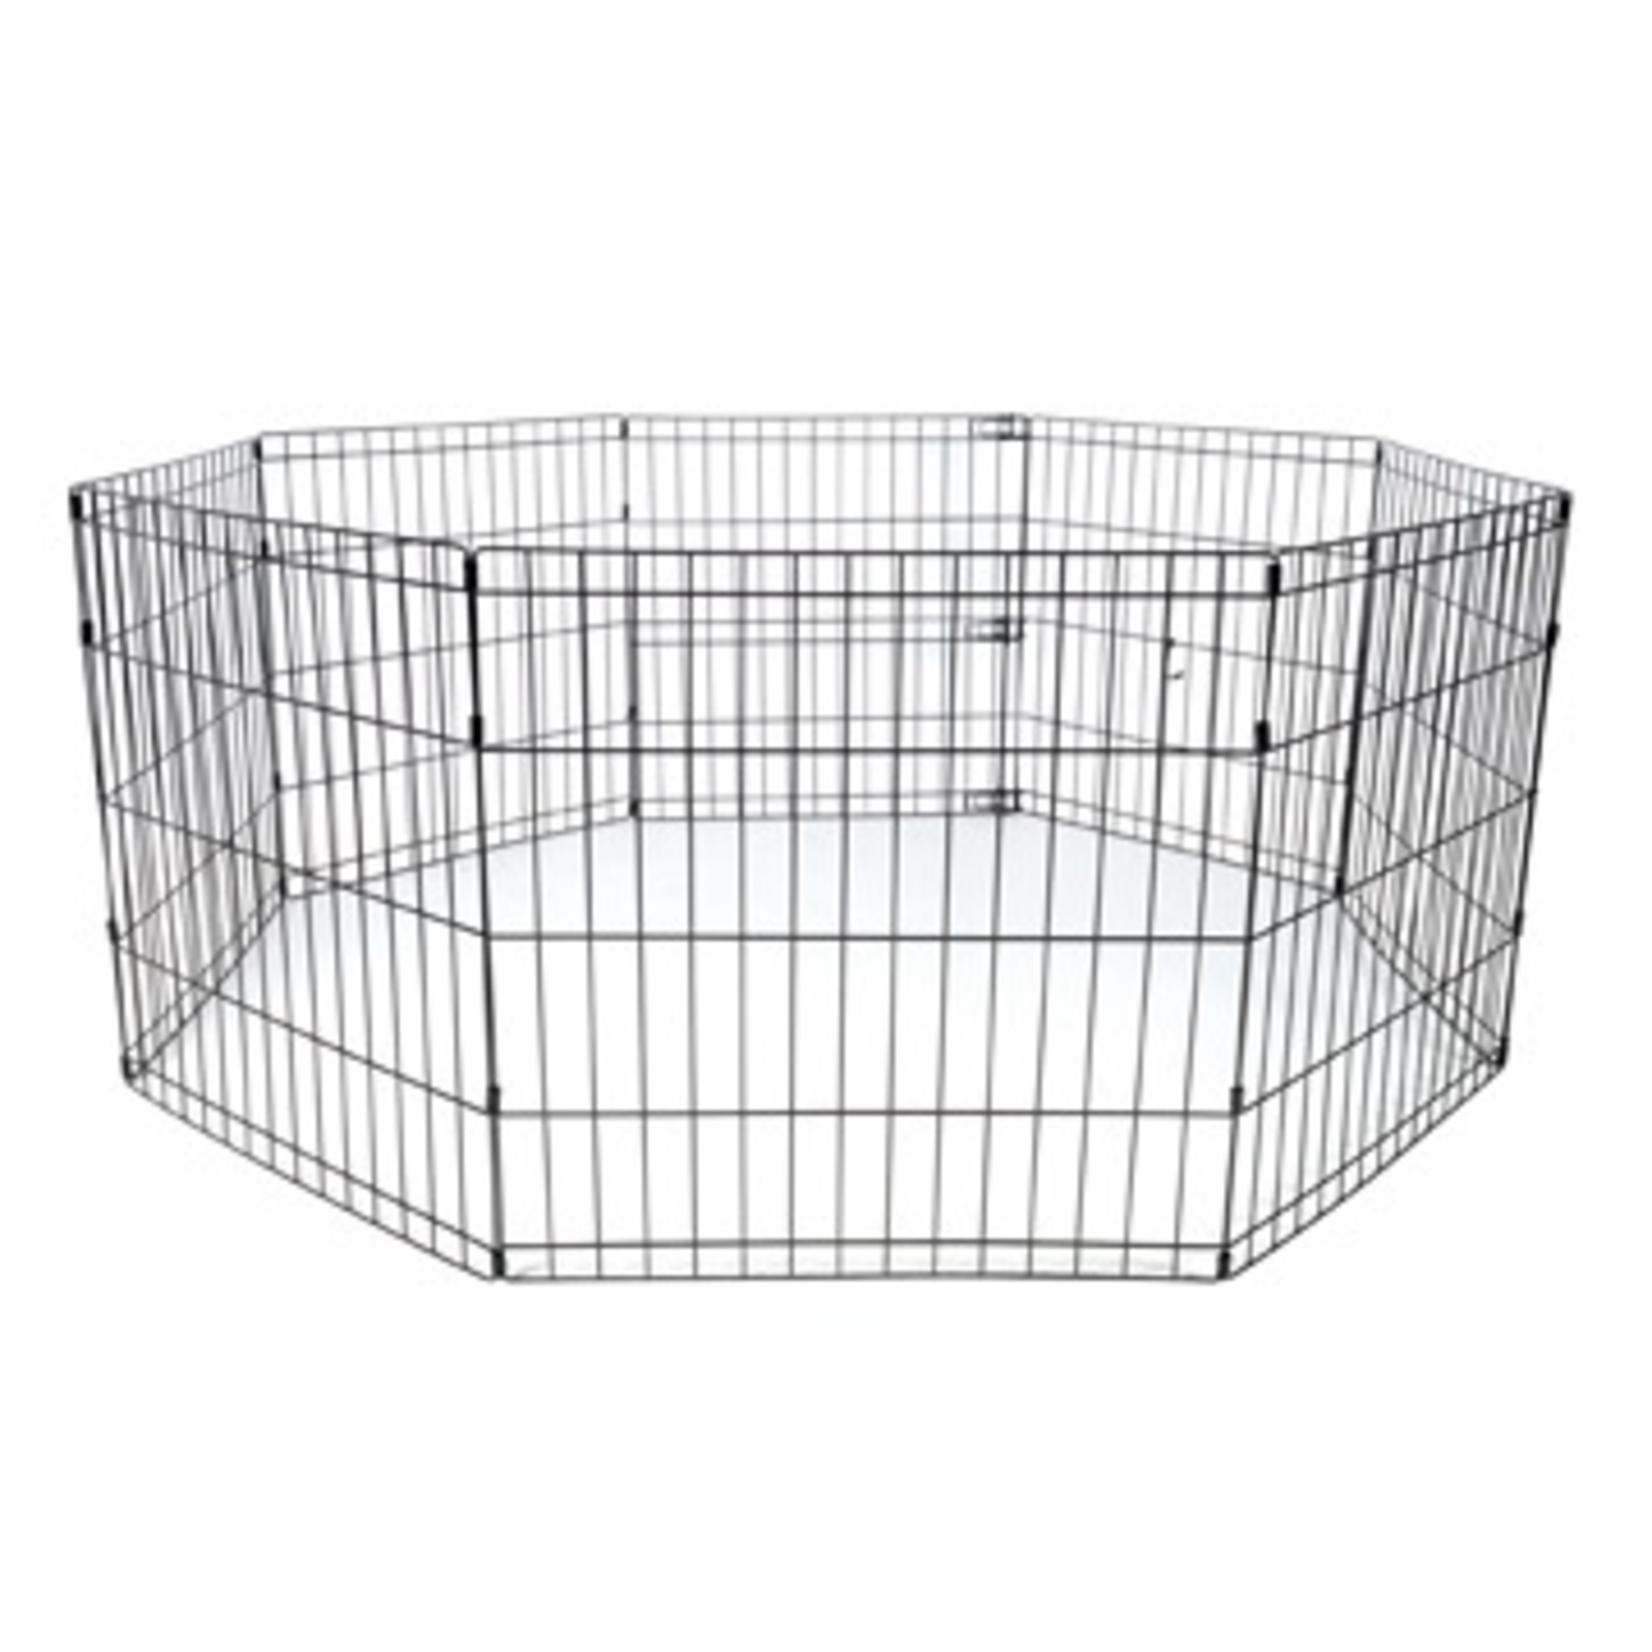 DOG IT (W) Dogit Outdoor Playpen - Small - 60 x 60 cm (23.6 x 23.6 in)